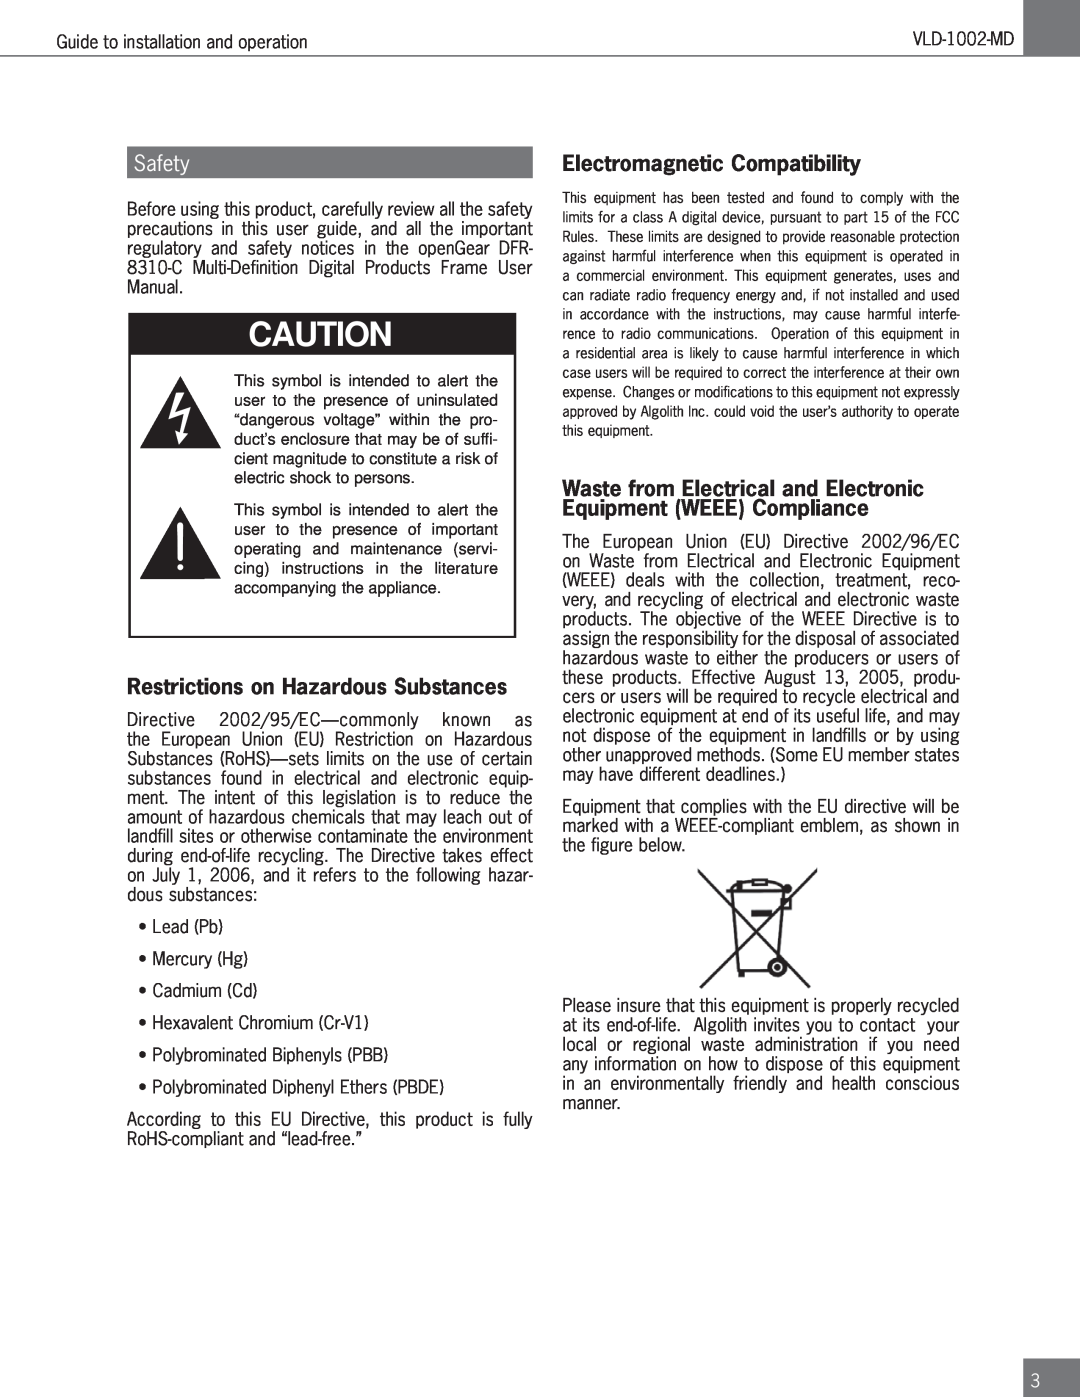 Algolith VLD-1002-MD operation manual Restrictions on Hazardous Substances, Electromagnetic Compatibility 